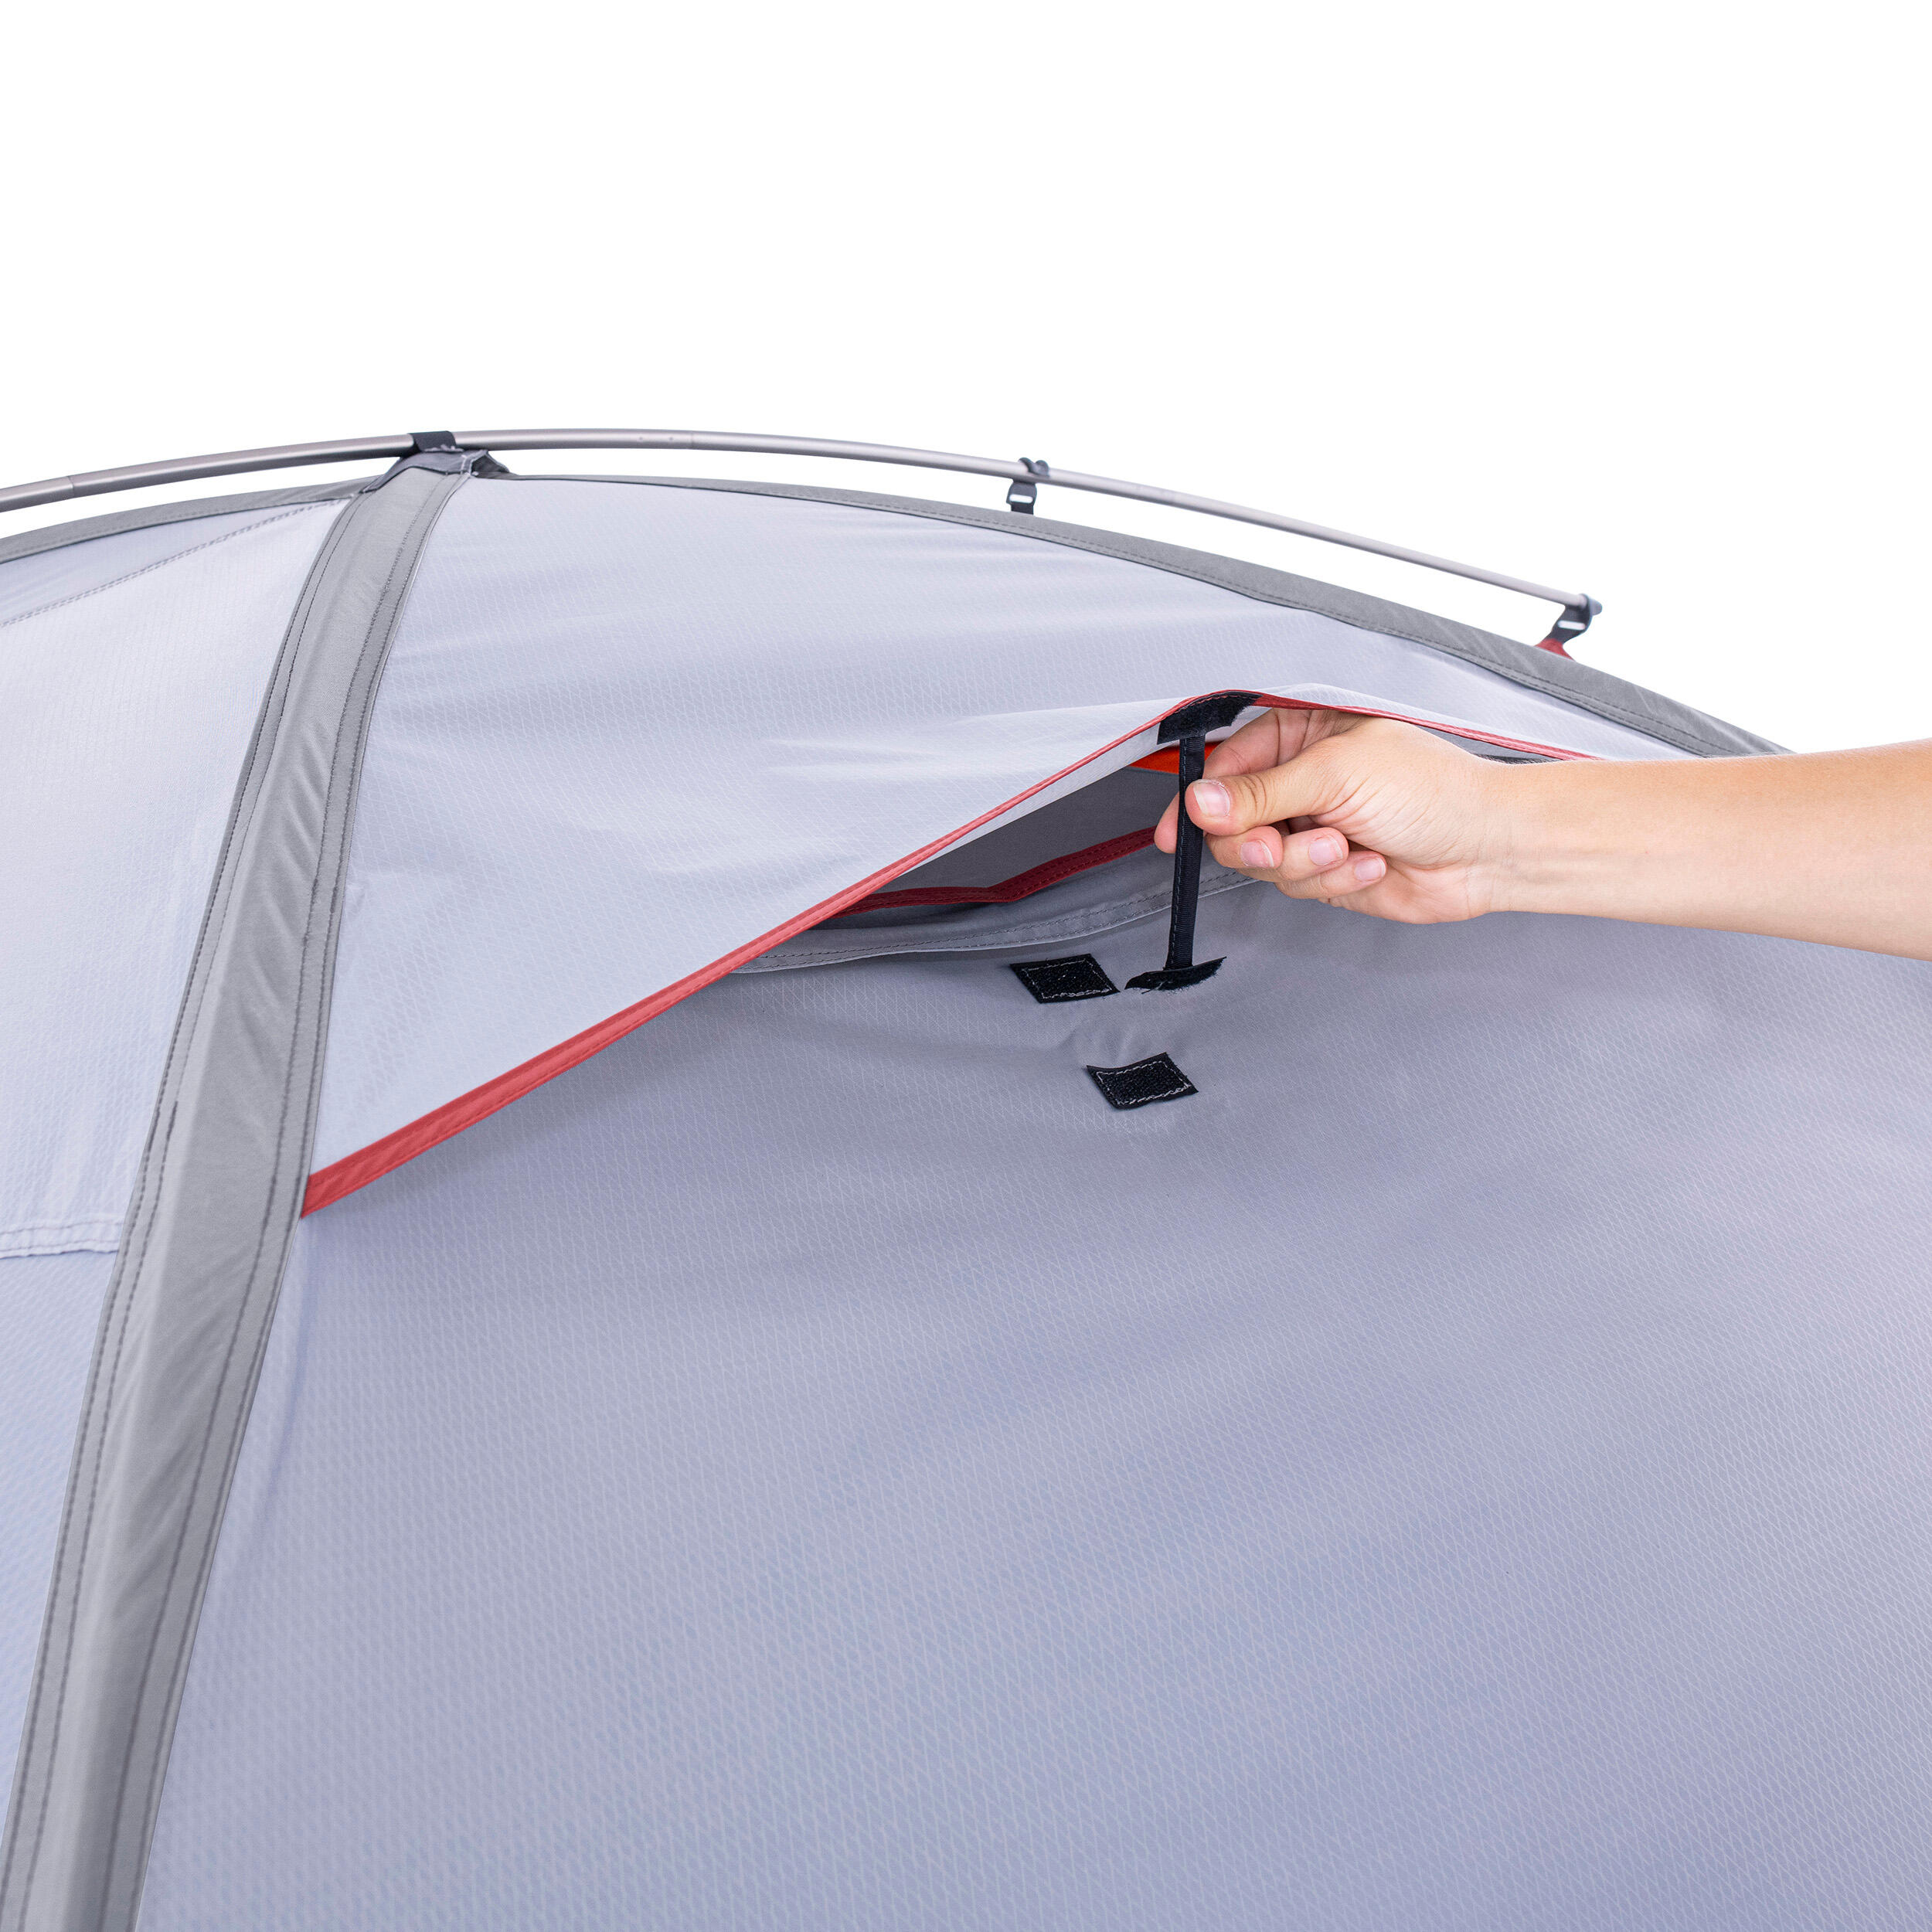 3-Person Dome Camping Tent - MT 500 - FORCLAZ